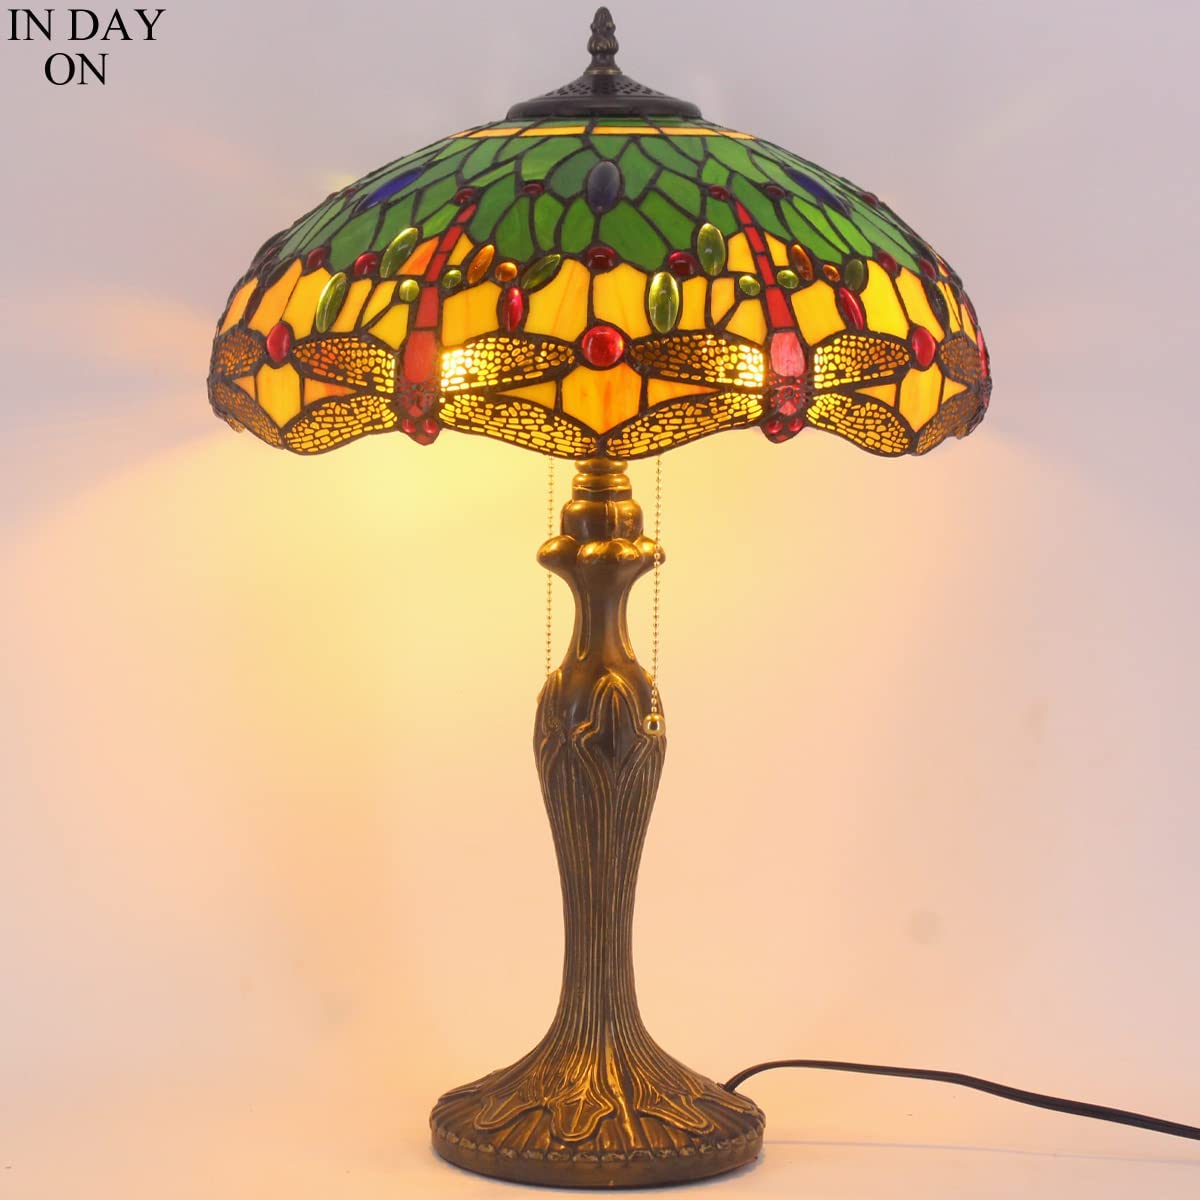  Lamp Stained Glass Bedside Table Lamp Green Yellow Dragonfly 16X16X24 Inches Desk Reading Light Metal Base Decor Bedroom Living Room Home Office S009G Series